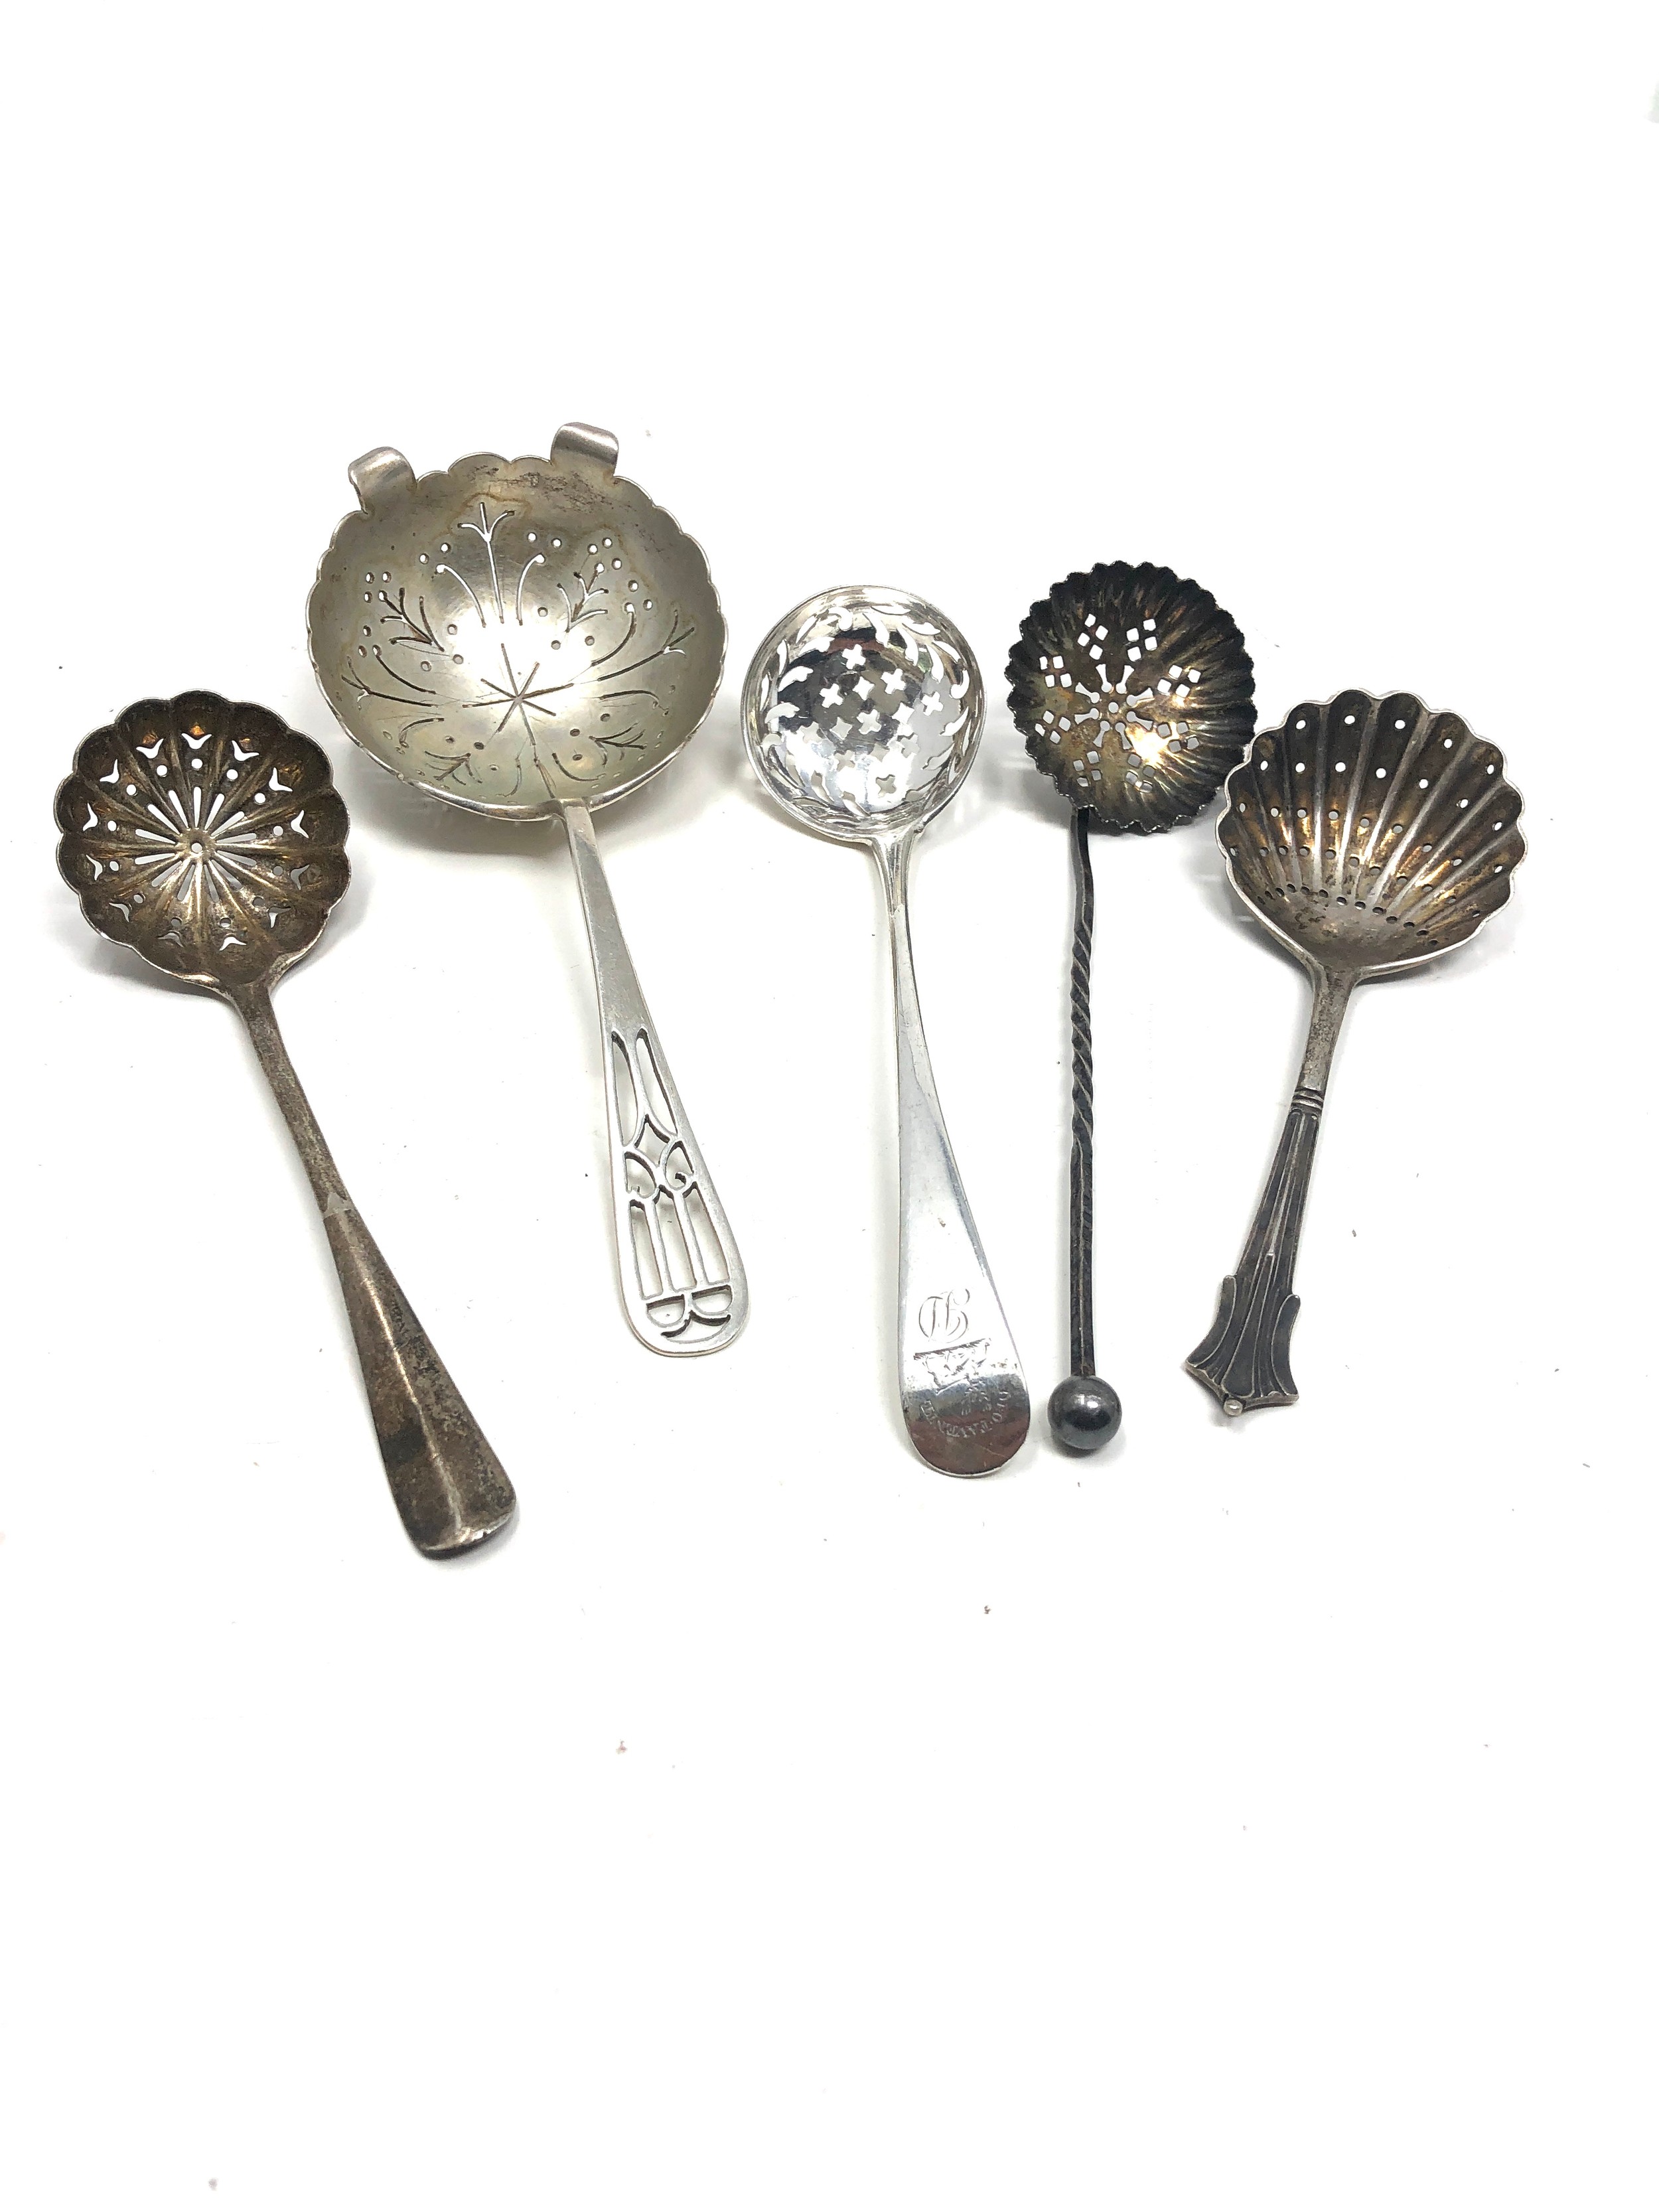 Selection of antique silver sifter spoons